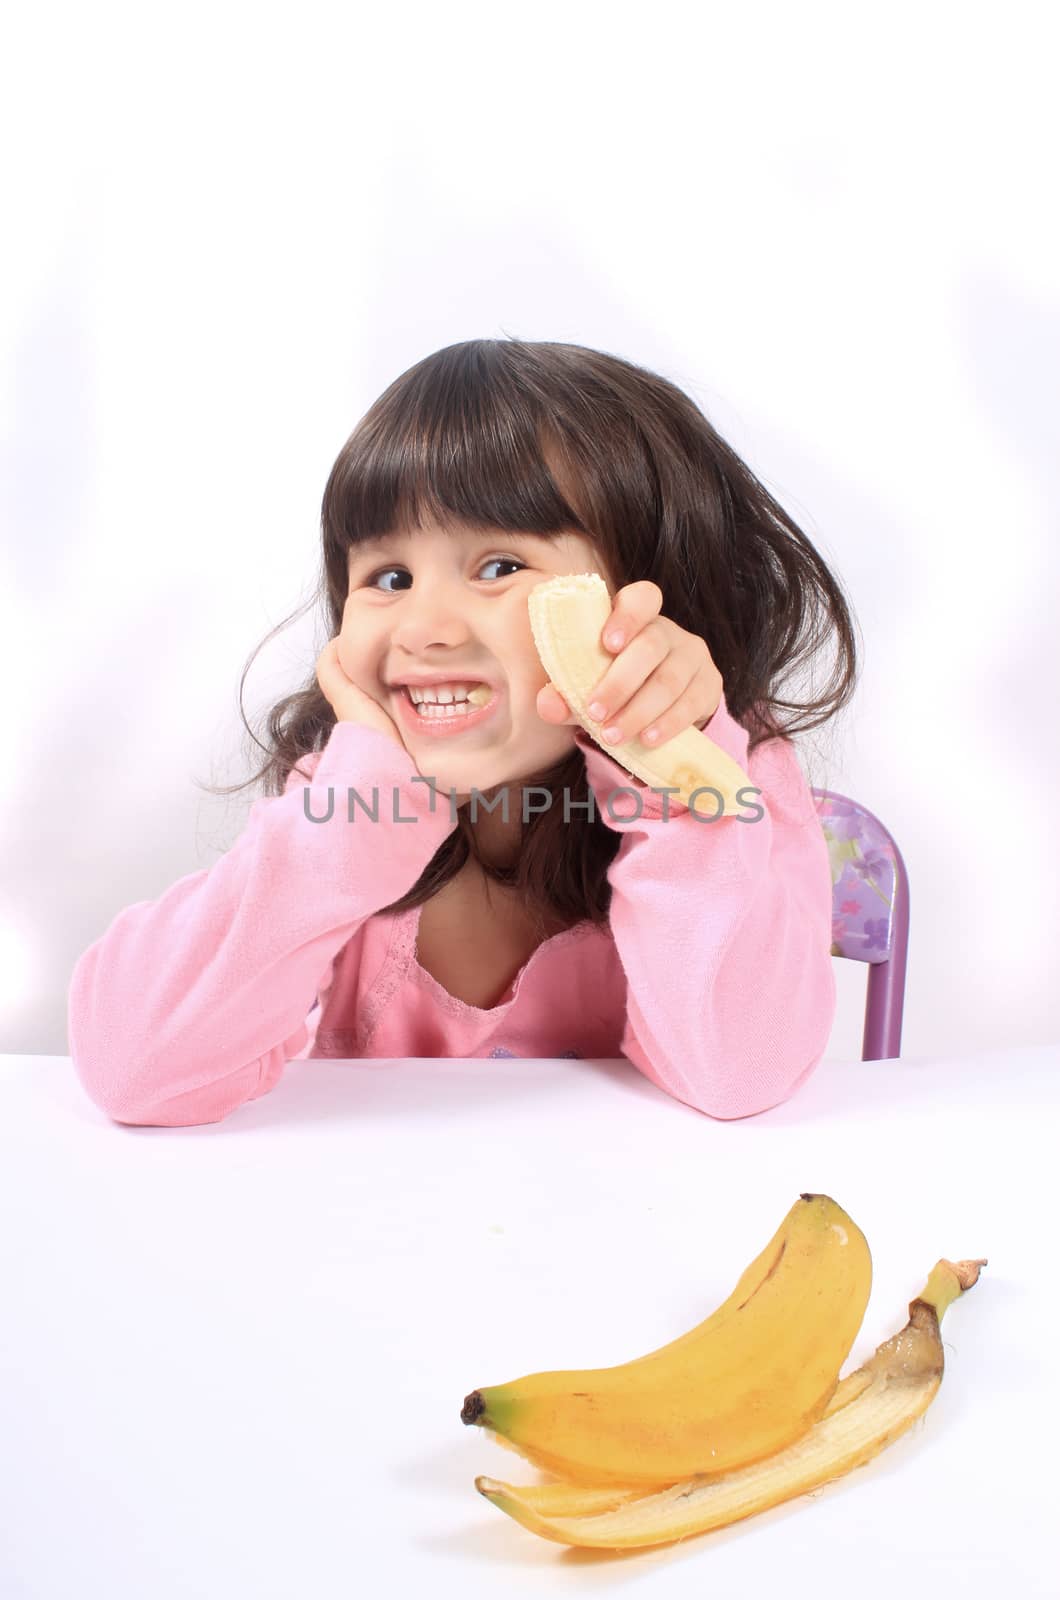 Young little girl making a funny face eating a healthy banana